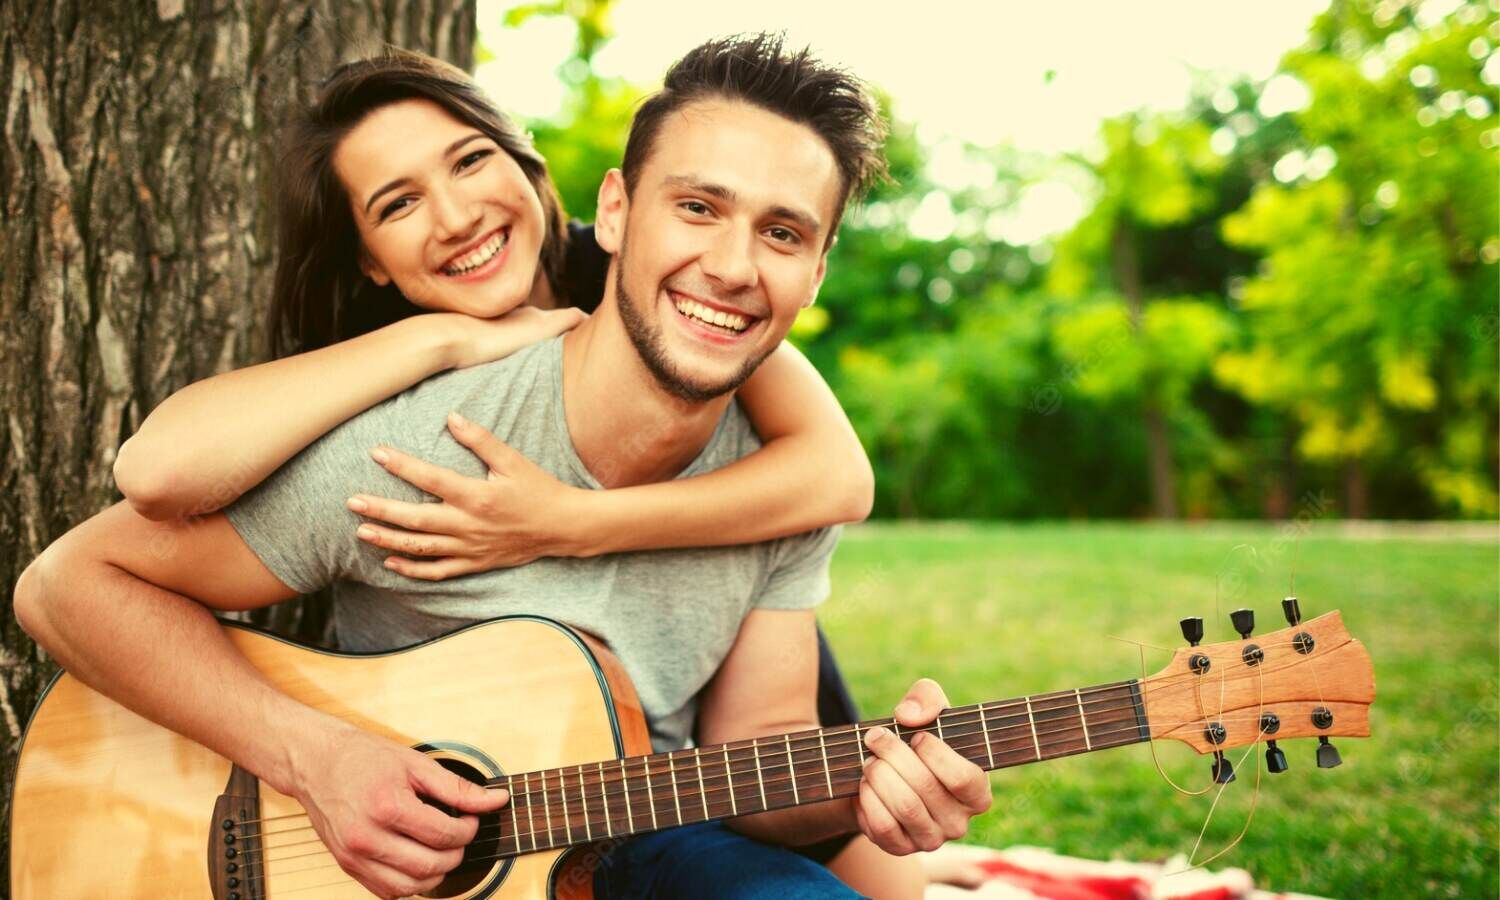 Healthy Relationship Tips: Follow these 5 tips to make the relationship happy and long